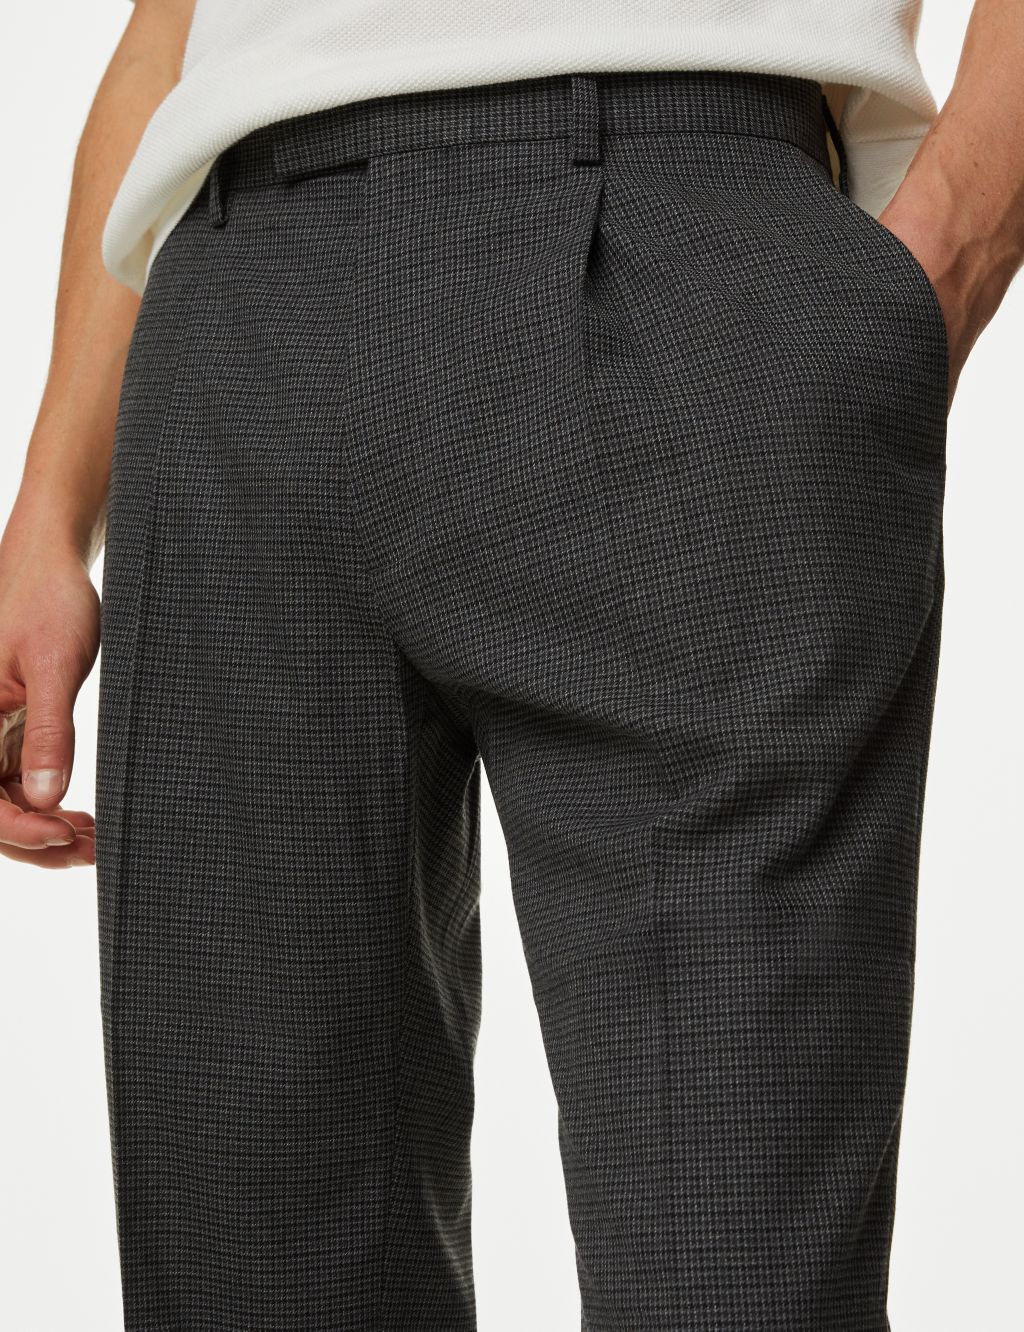 Textured Checked Stretch Trousers image 4